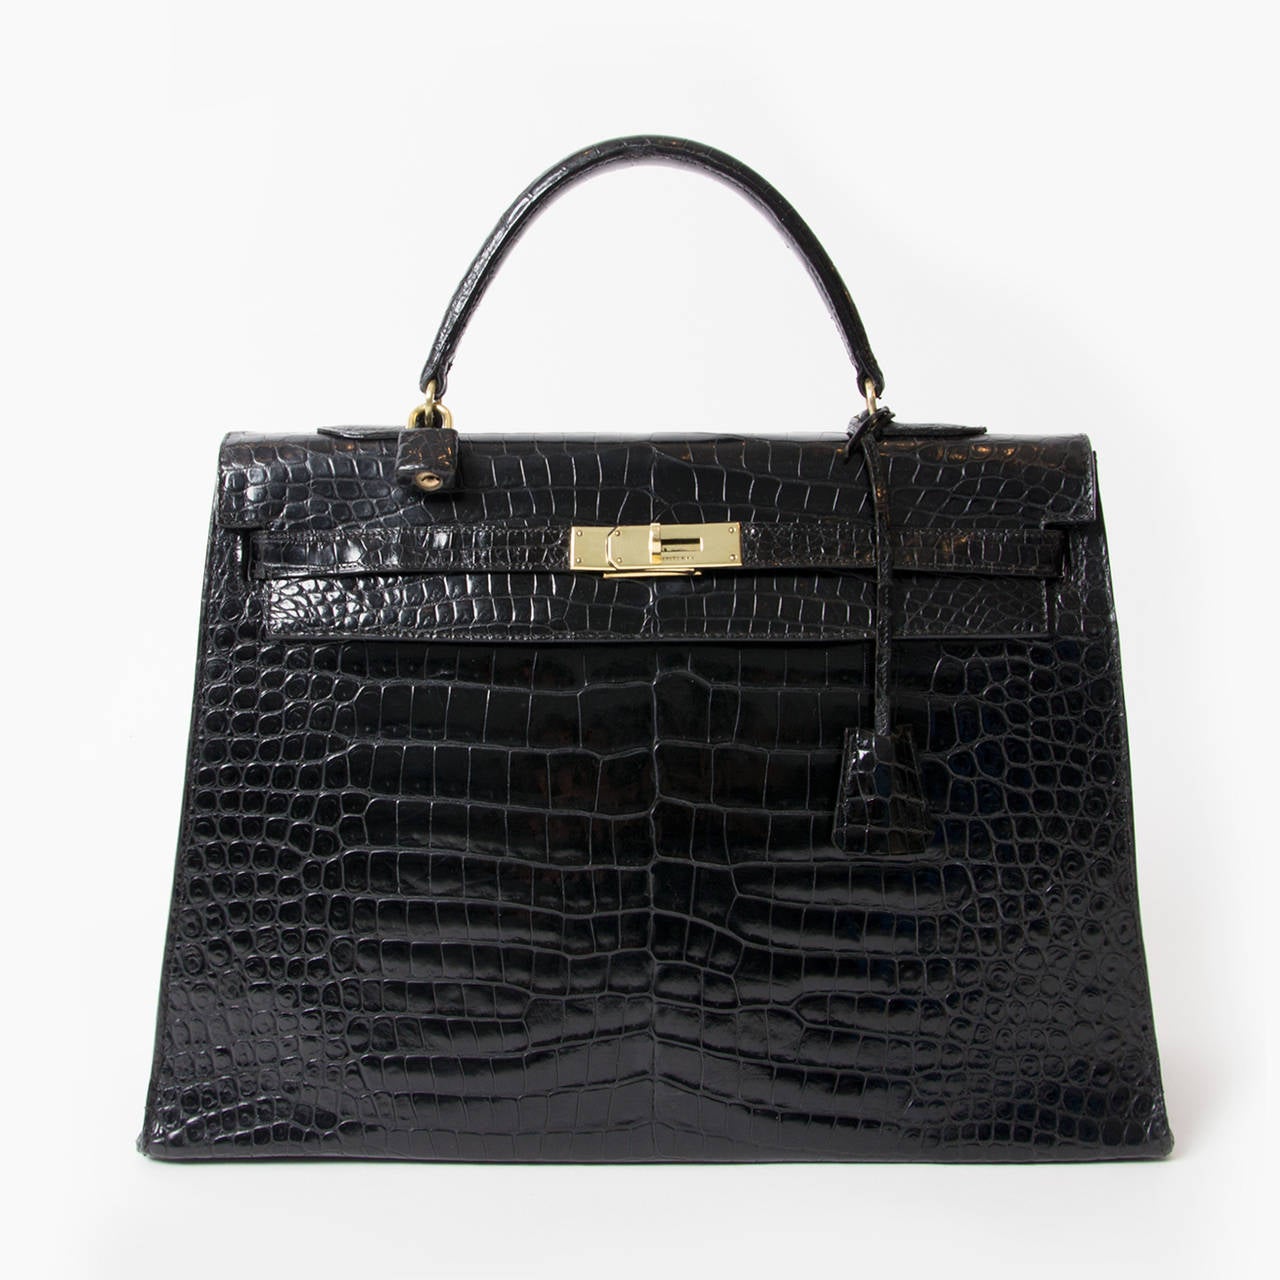 Hermes Kelly 35 handbag in Porosus crocodile with gold hardware
Black color
Crocodile Porosus
Excellent condition
This Kelly 35 Porosus will come with dustbag, clochette , lock gained and keys
Blind Stamp Reads Letter: T 

A timeless classic,